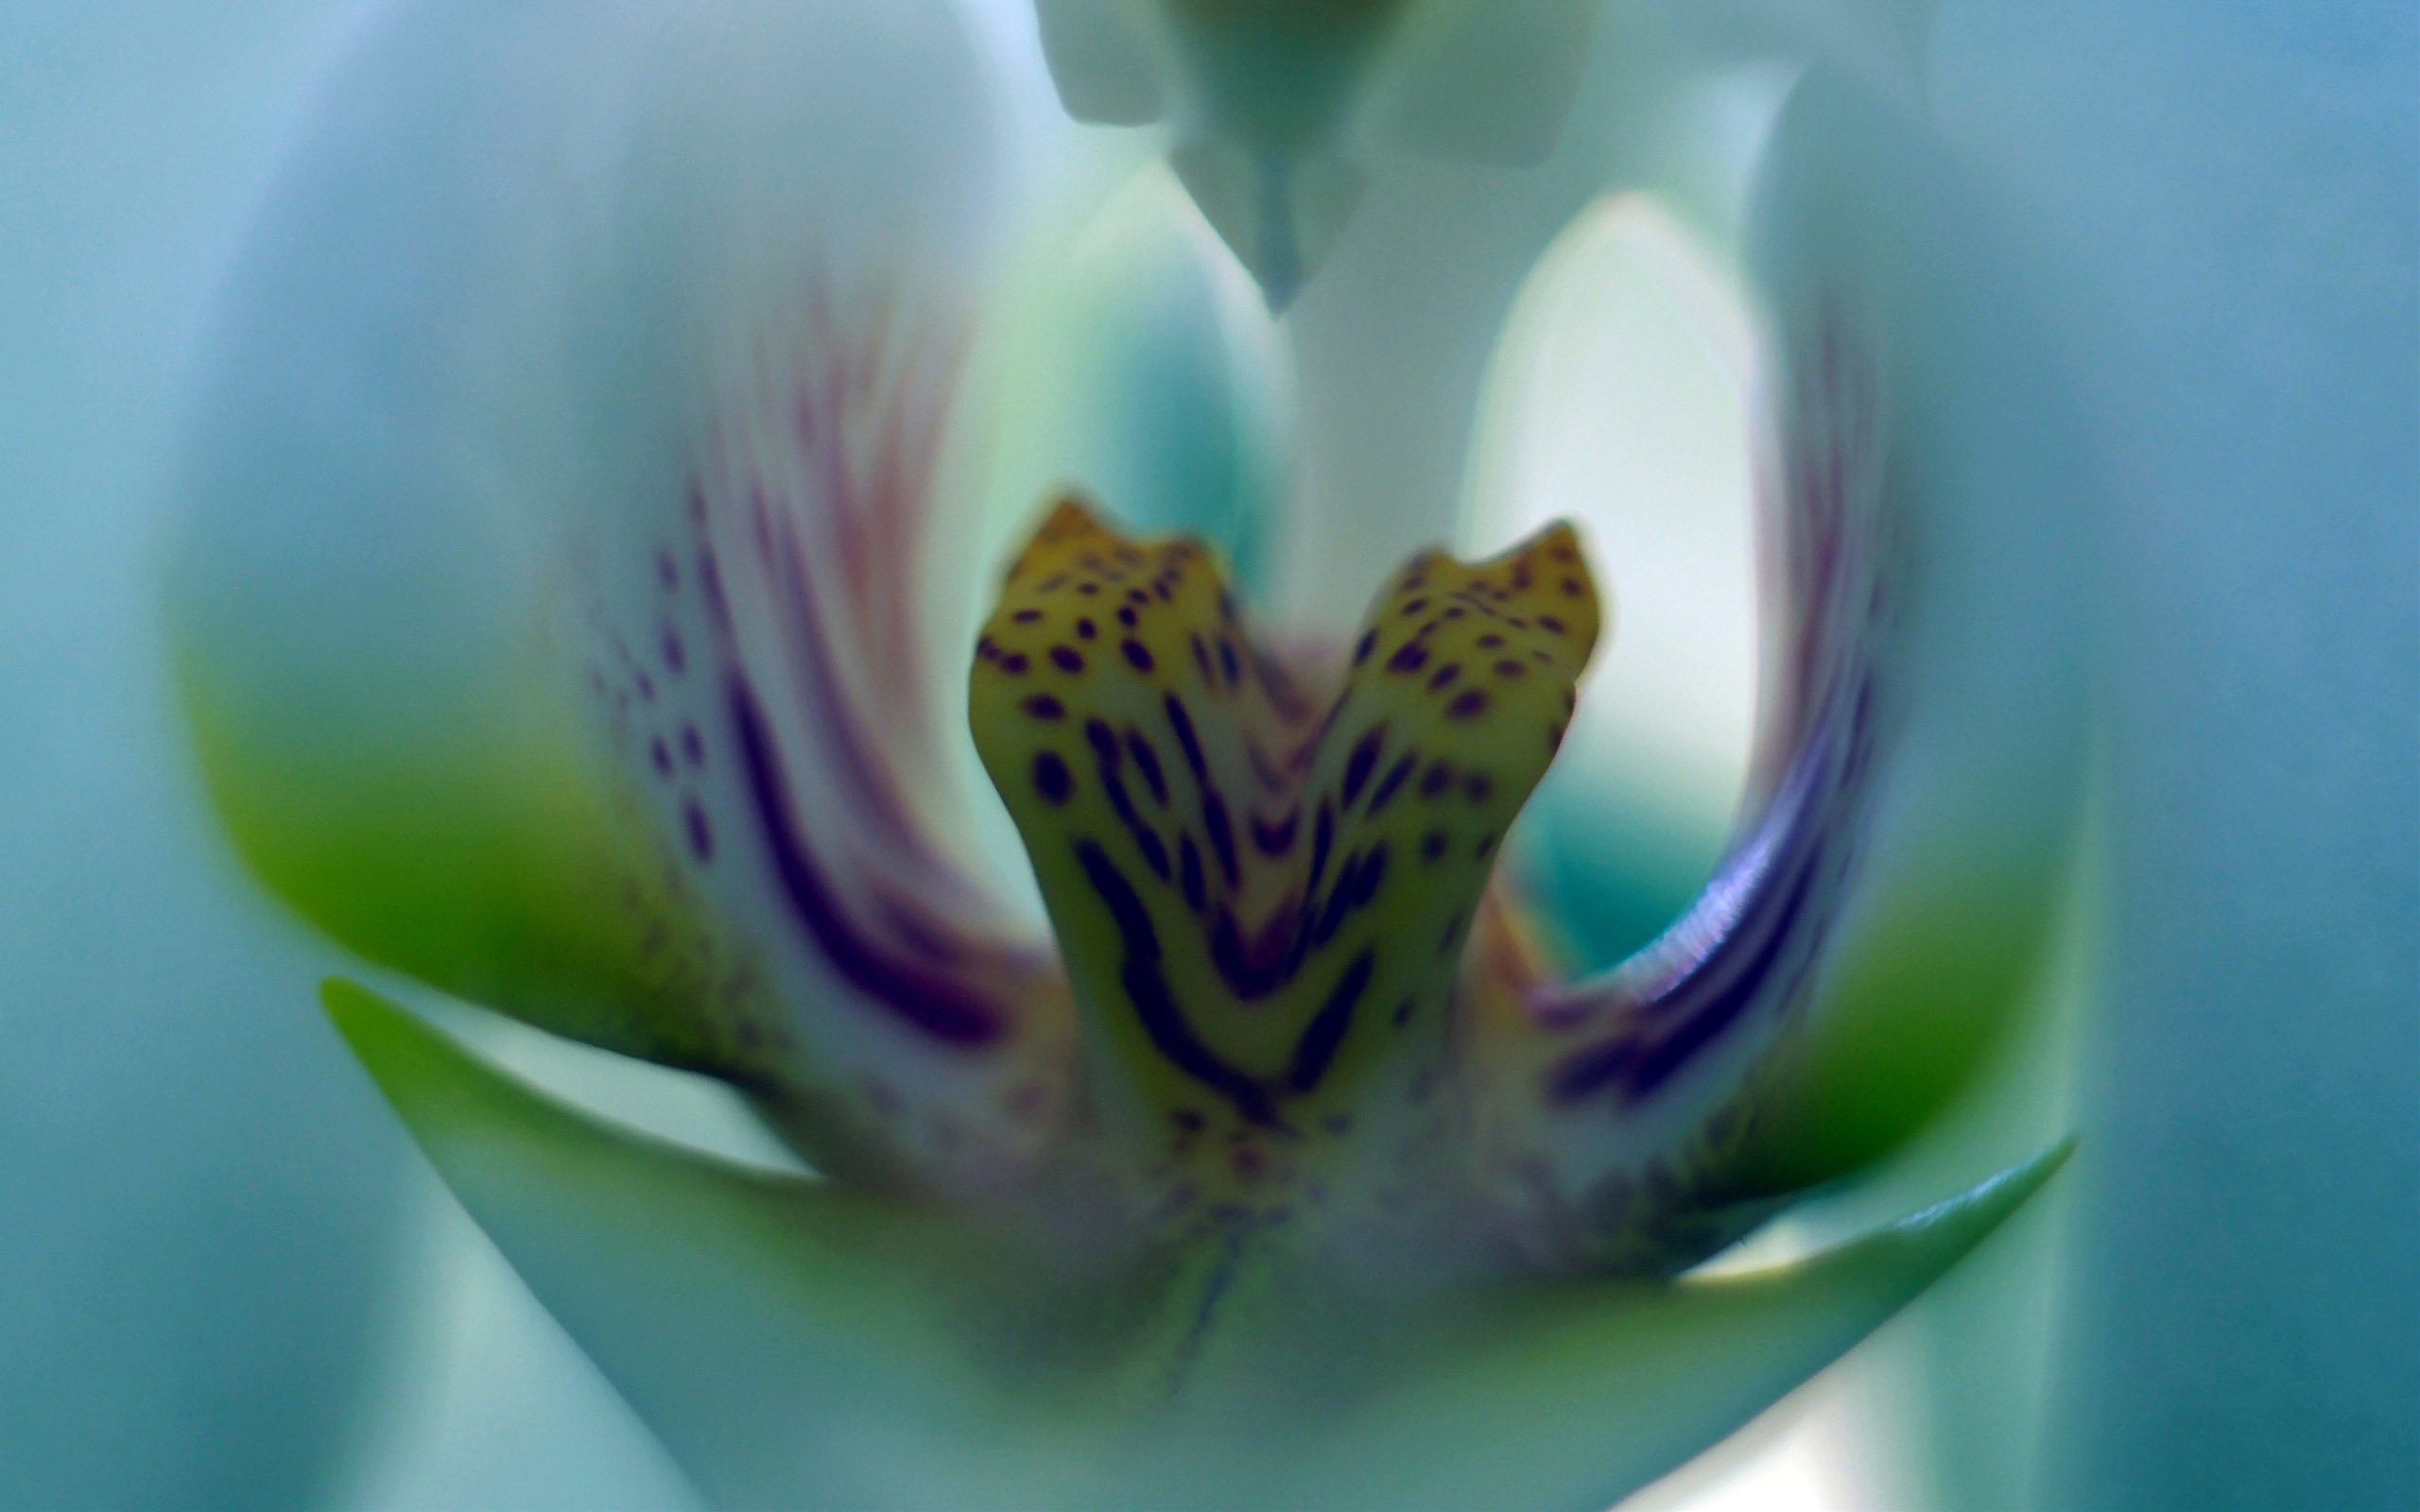 Nature's beauty captured in a vibrant orchid bloom - Orchidee desktop wallpaper